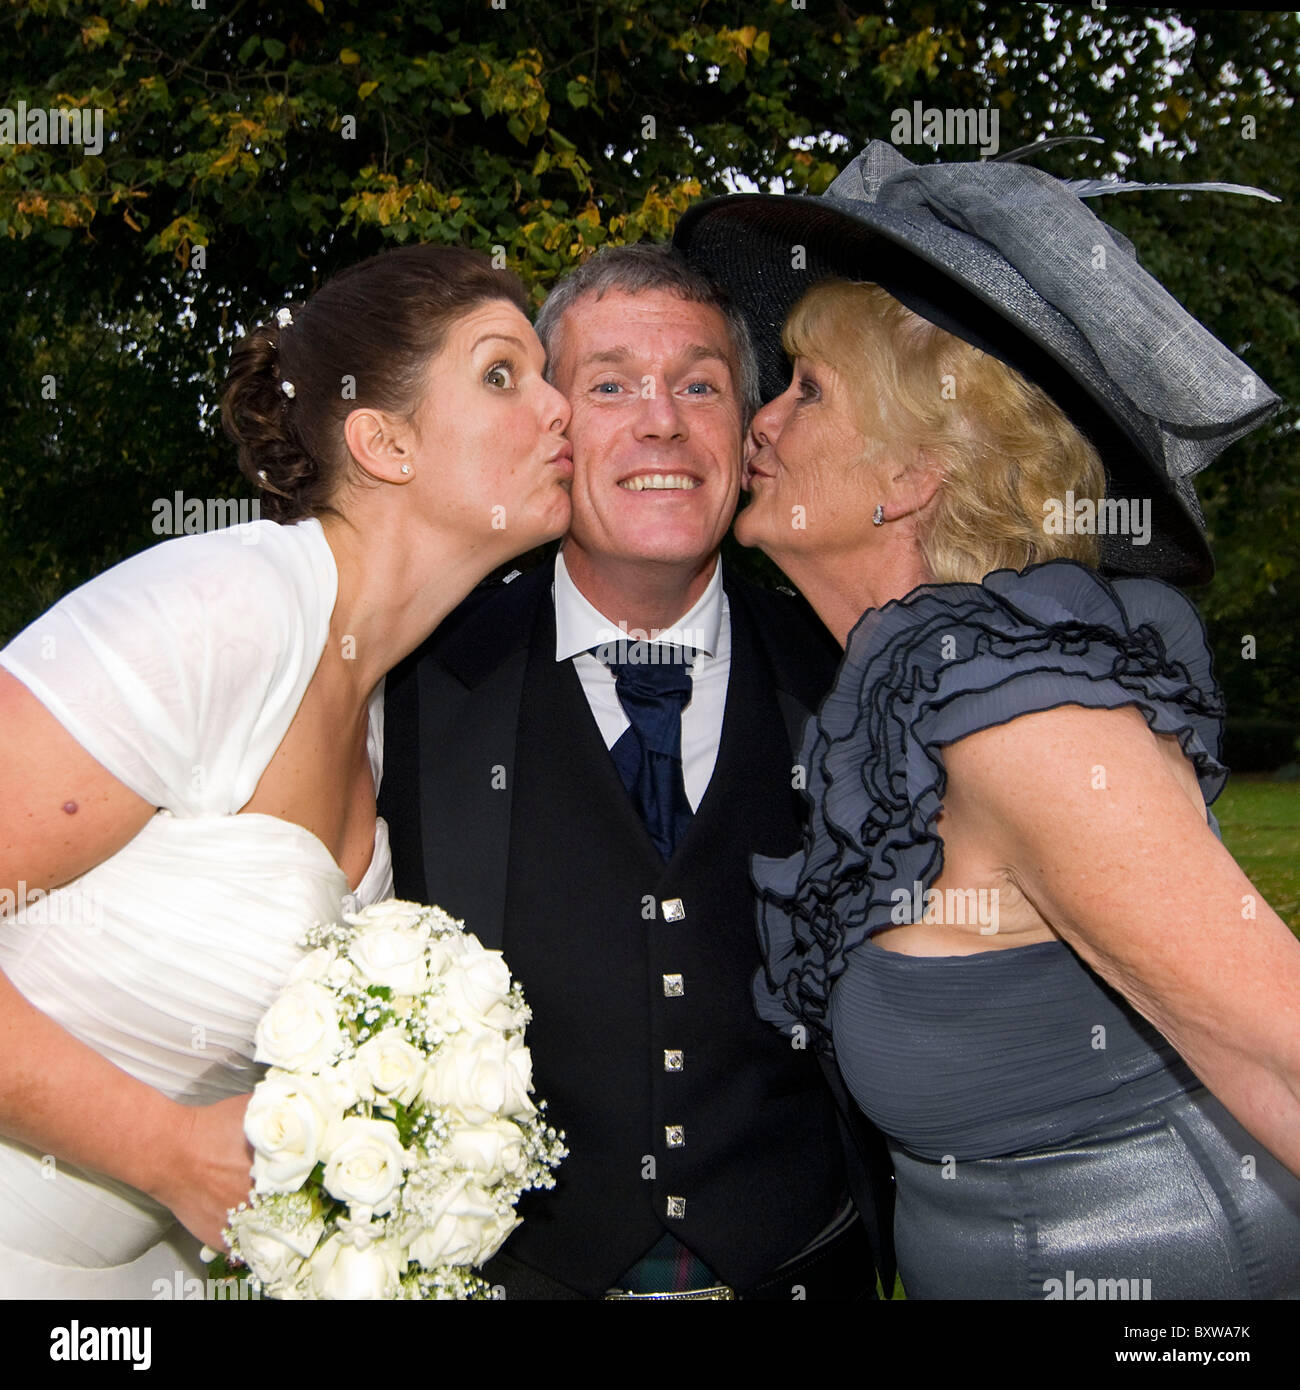 Square close up fun portrait of a groom on his wedding day getting a kiss on both cheeks from his new bride and mother-in-law. Stock Photo